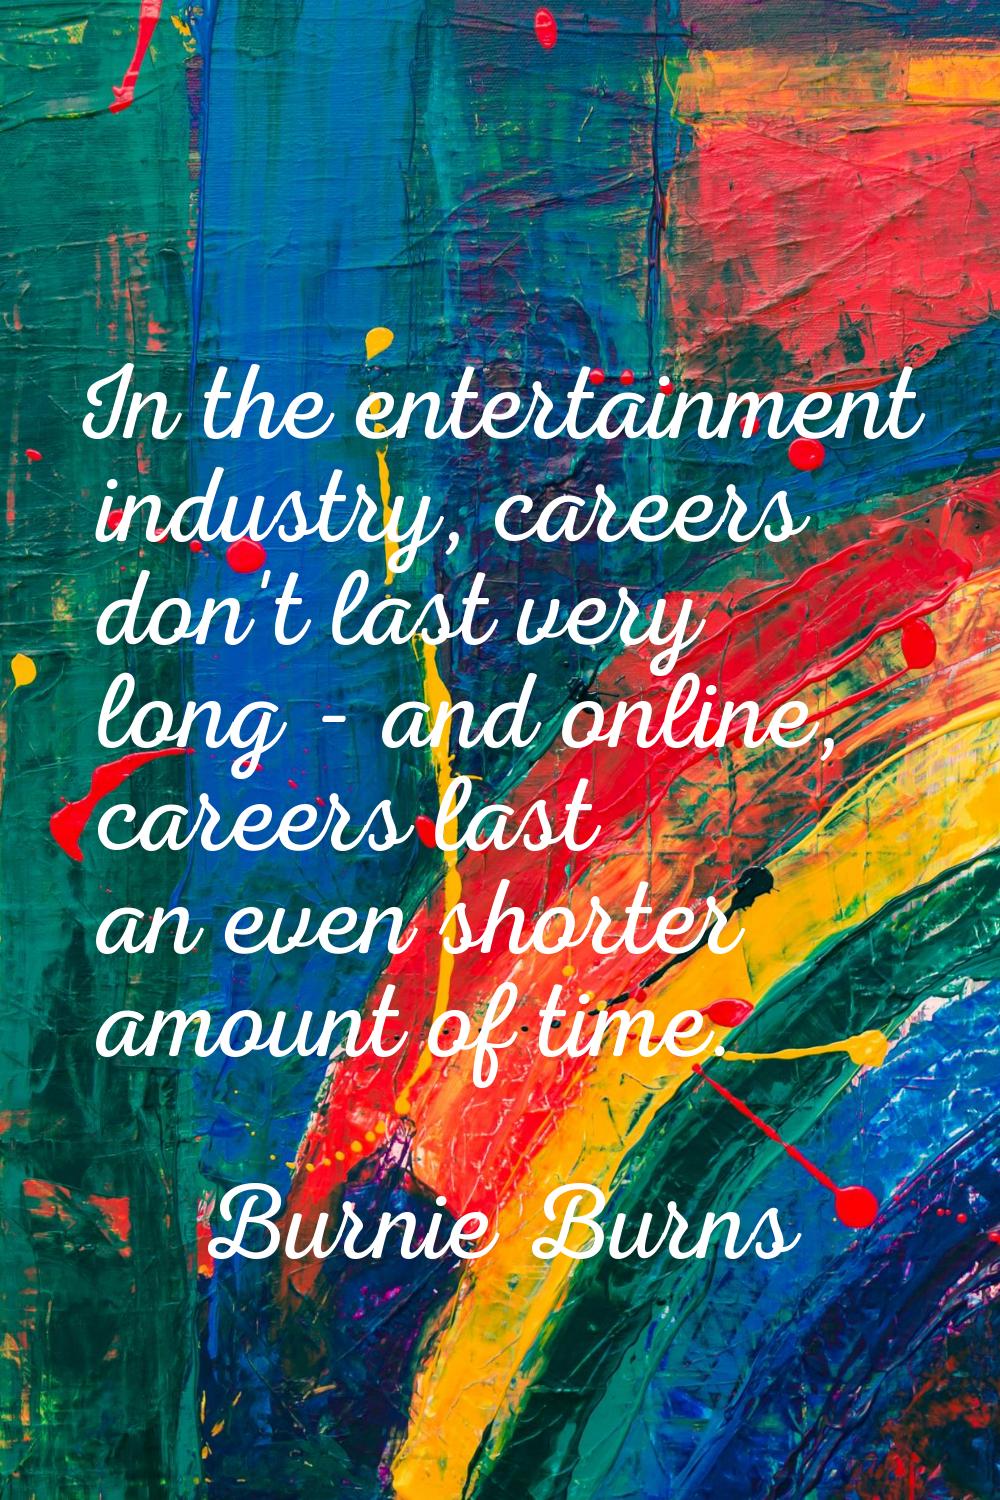 In the entertainment industry, careers don't last very long - and online, careers last an even shor